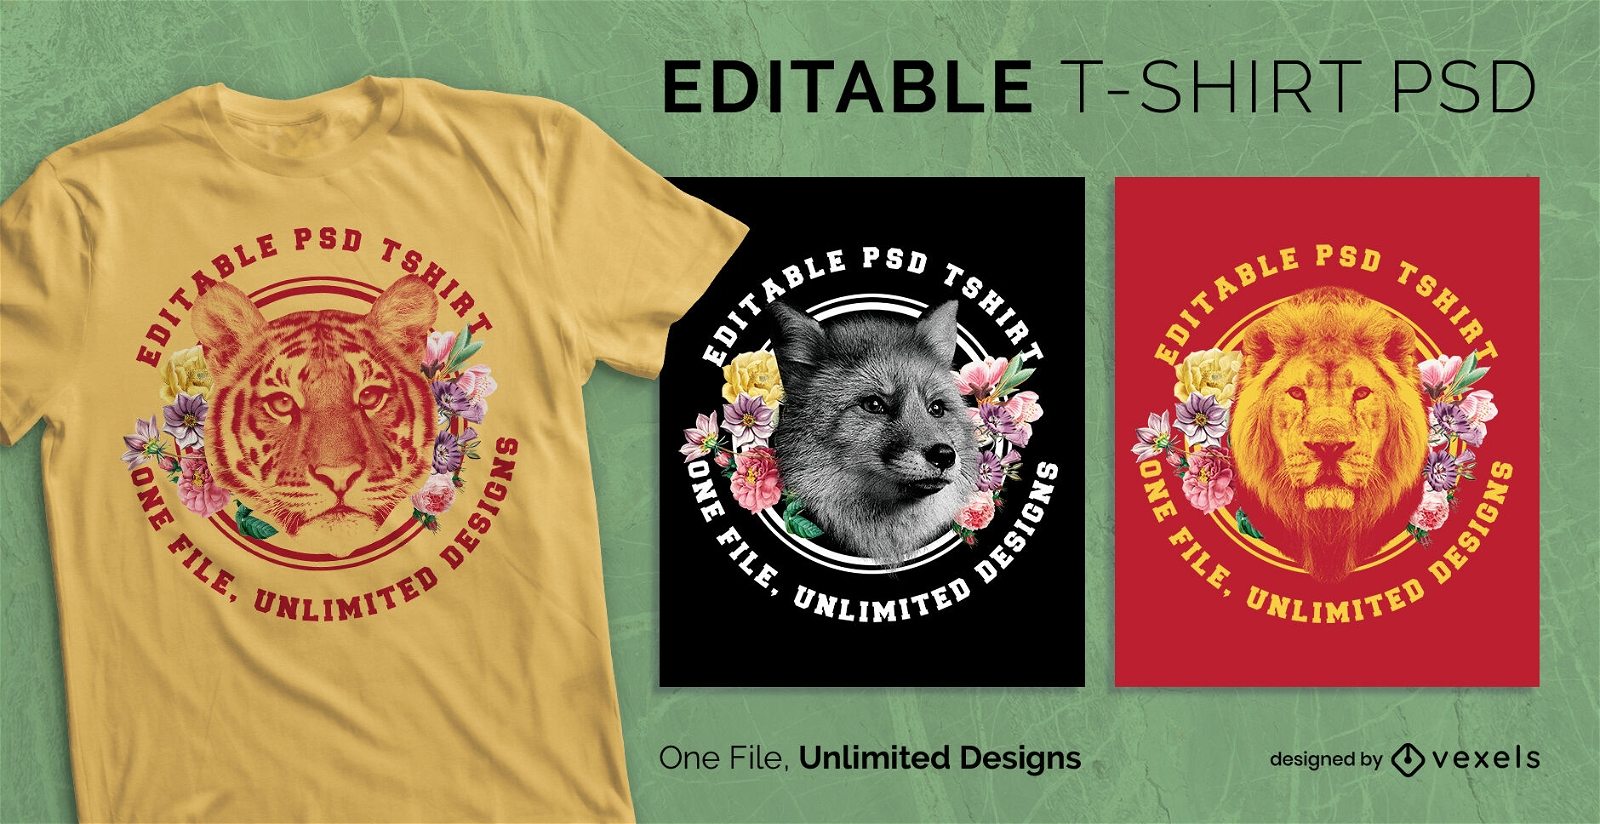 Wild animals with flowers scalable t-shirt psd